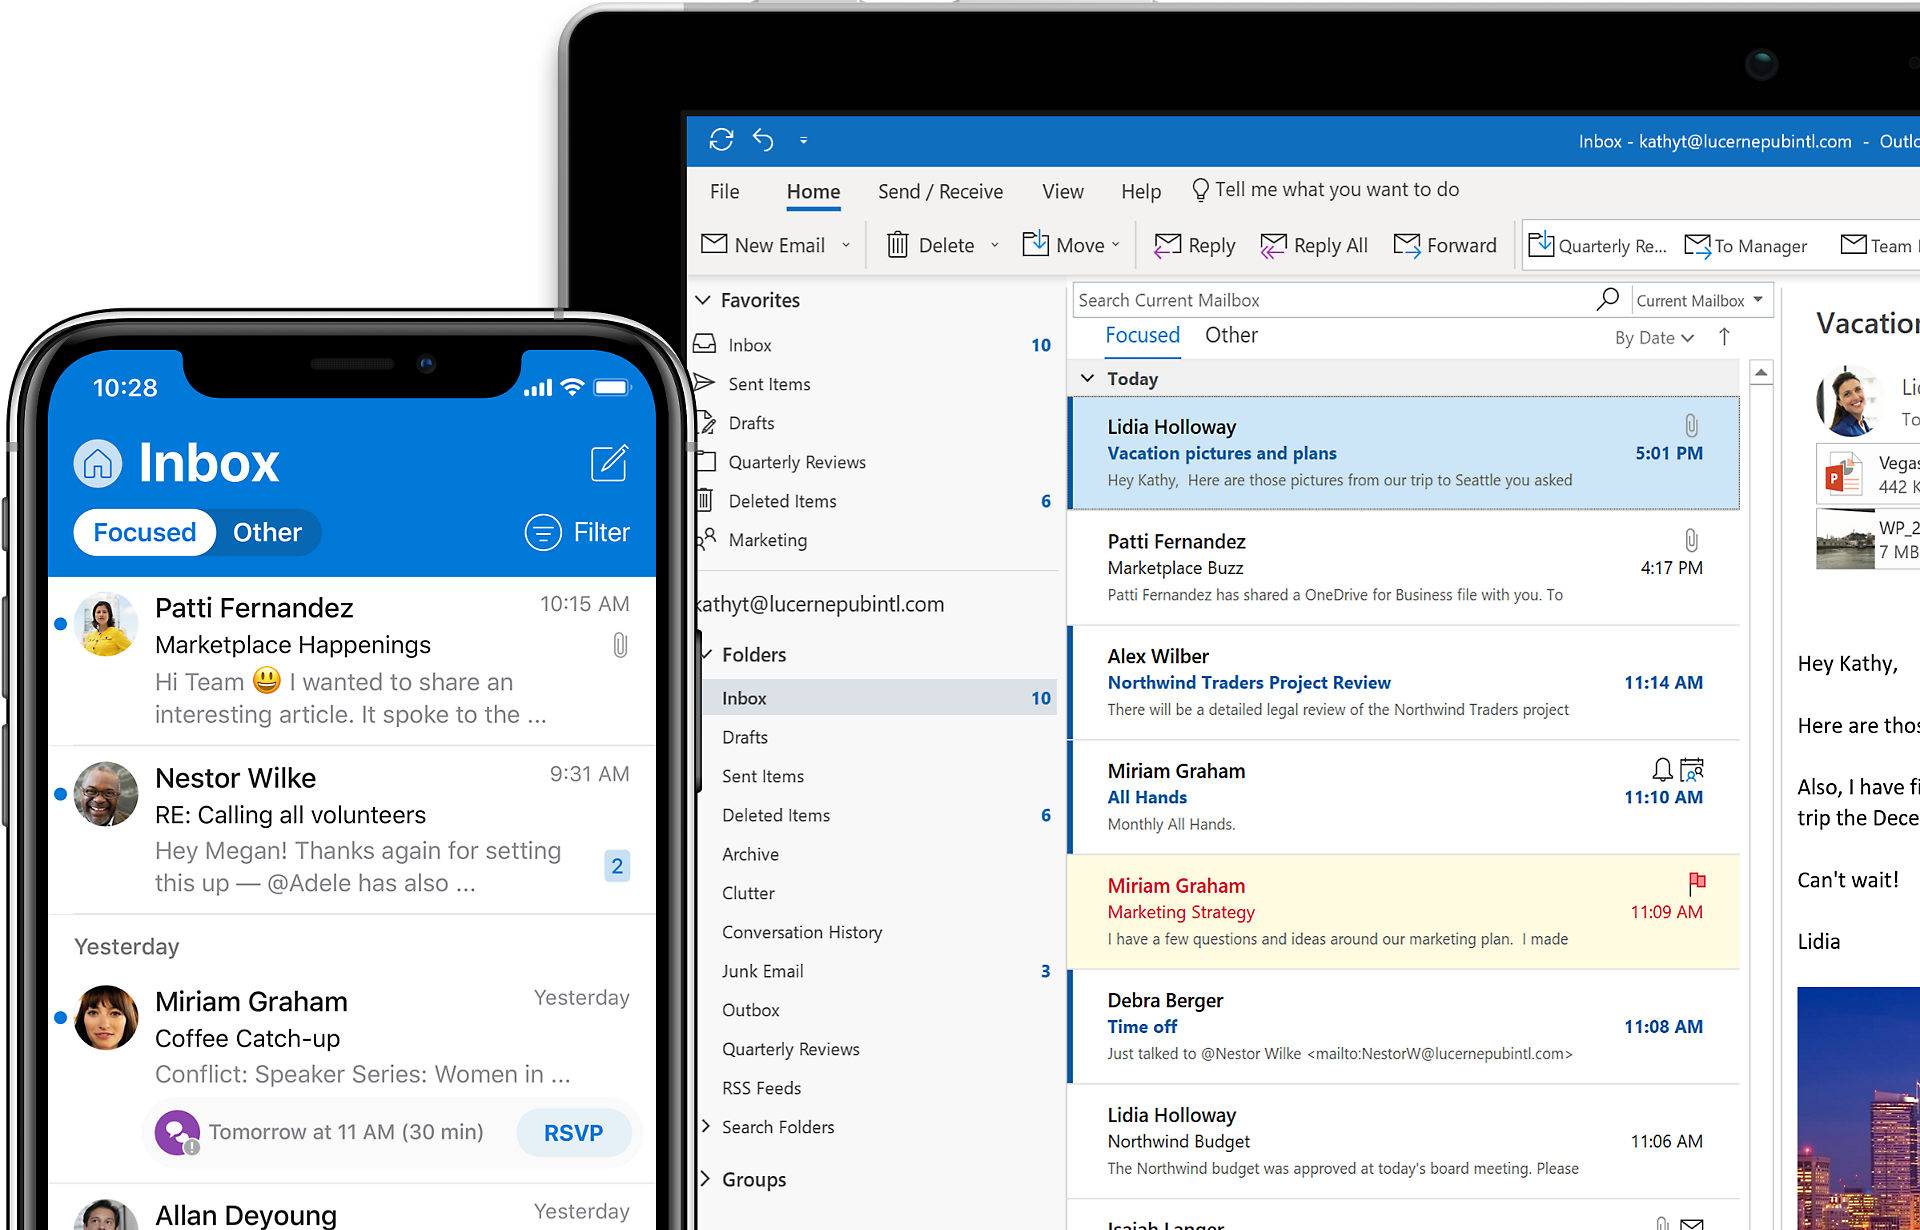 microsoft outlook 2010 download free for windows 10